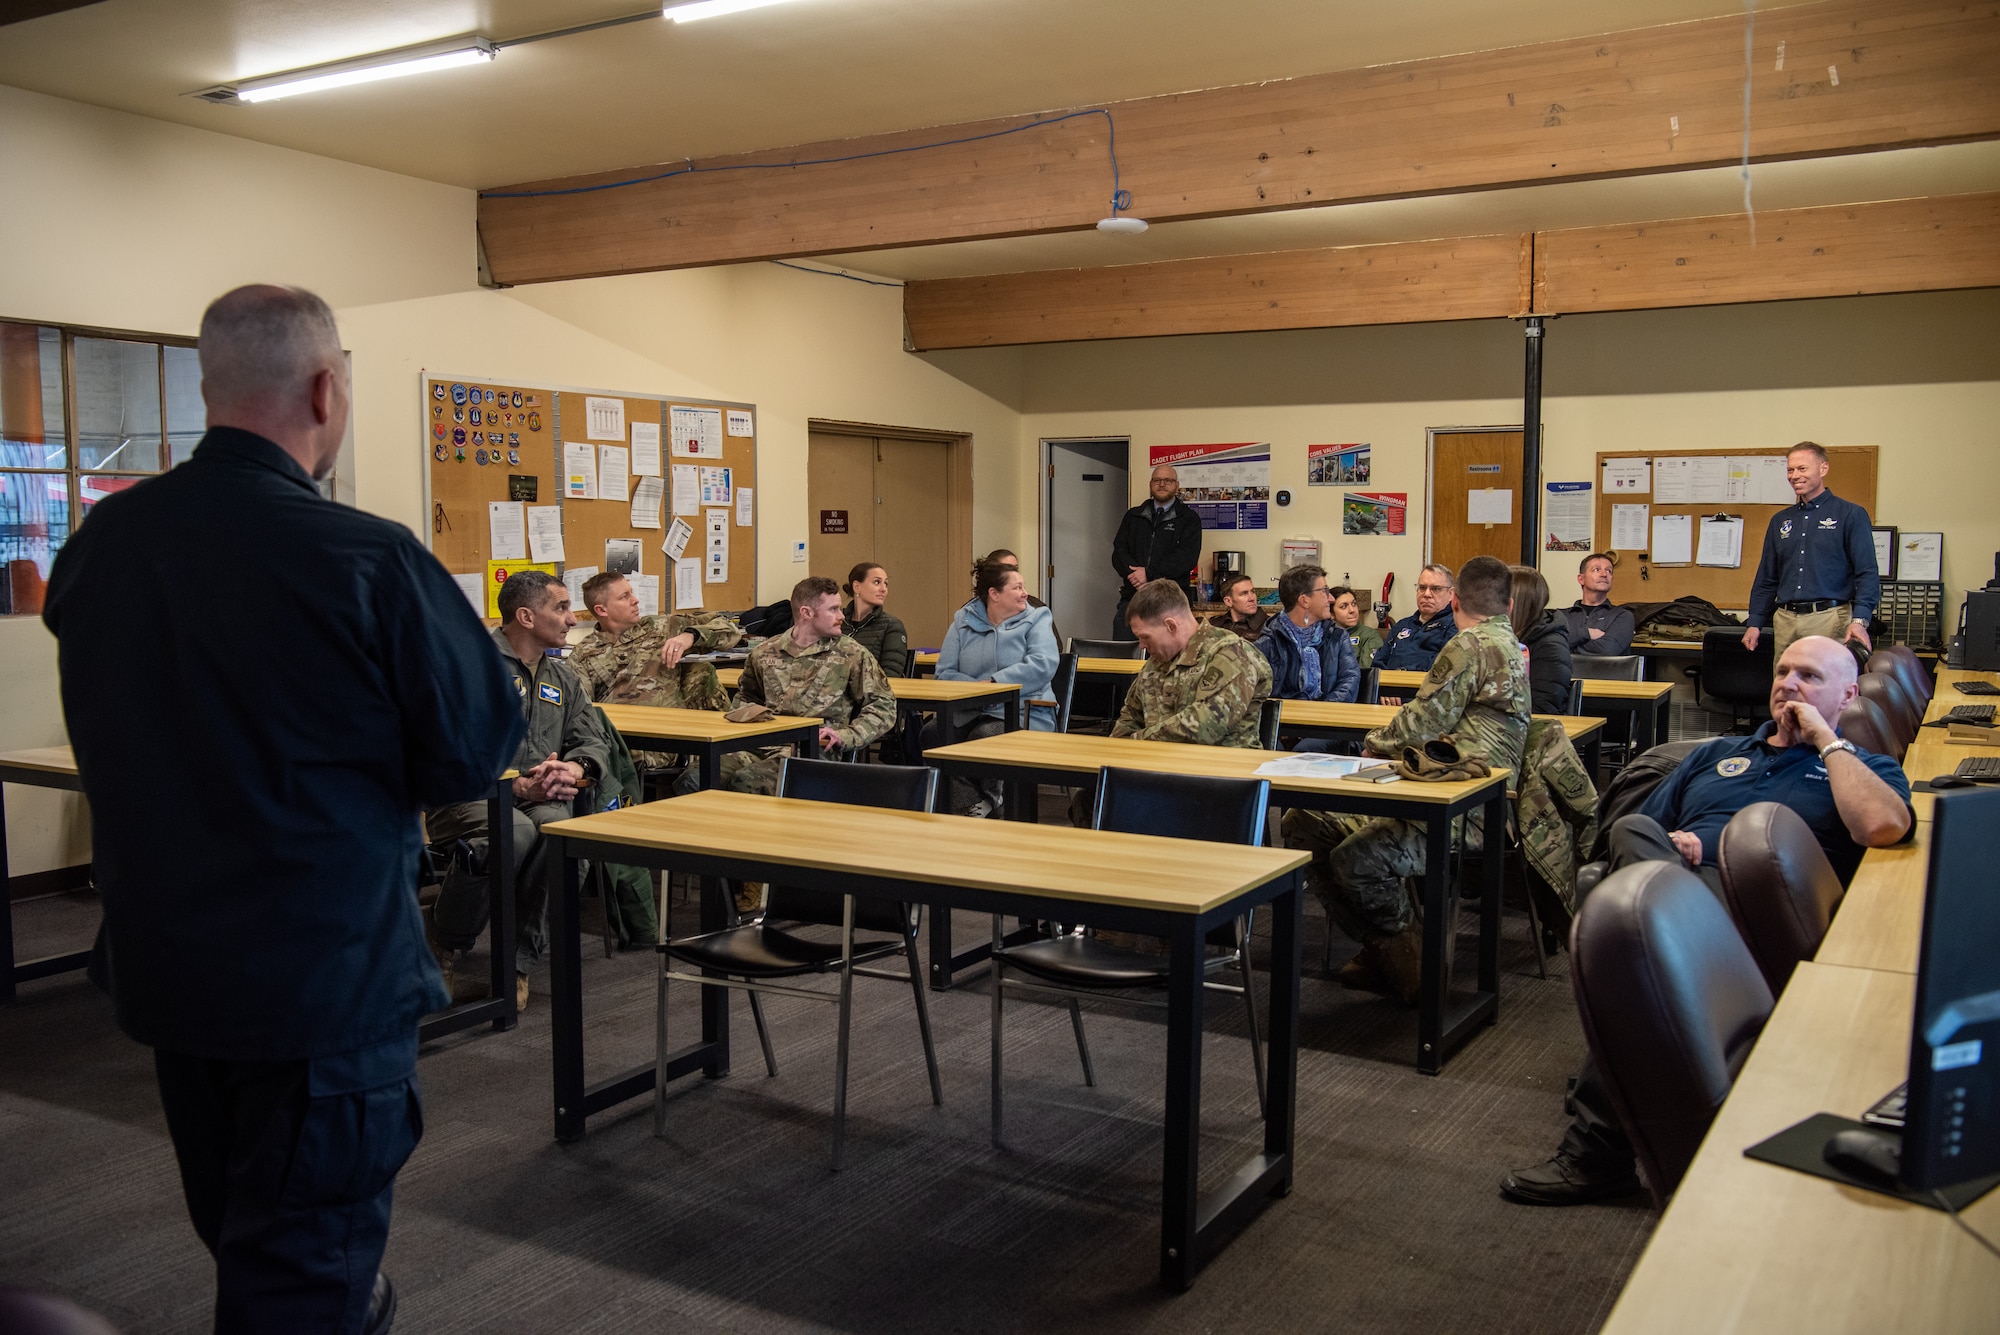 The Alaska Wing of the CAP is a diverse group of cadet and adult volunteers that serve the communities, Alaska, and the nation by assisting in search and rescue, humanitarian aid, and various assistance to local government and federal agencies. The CAP also aims to inspire the next generation of aviation, space and cyber leaders through STEM education.